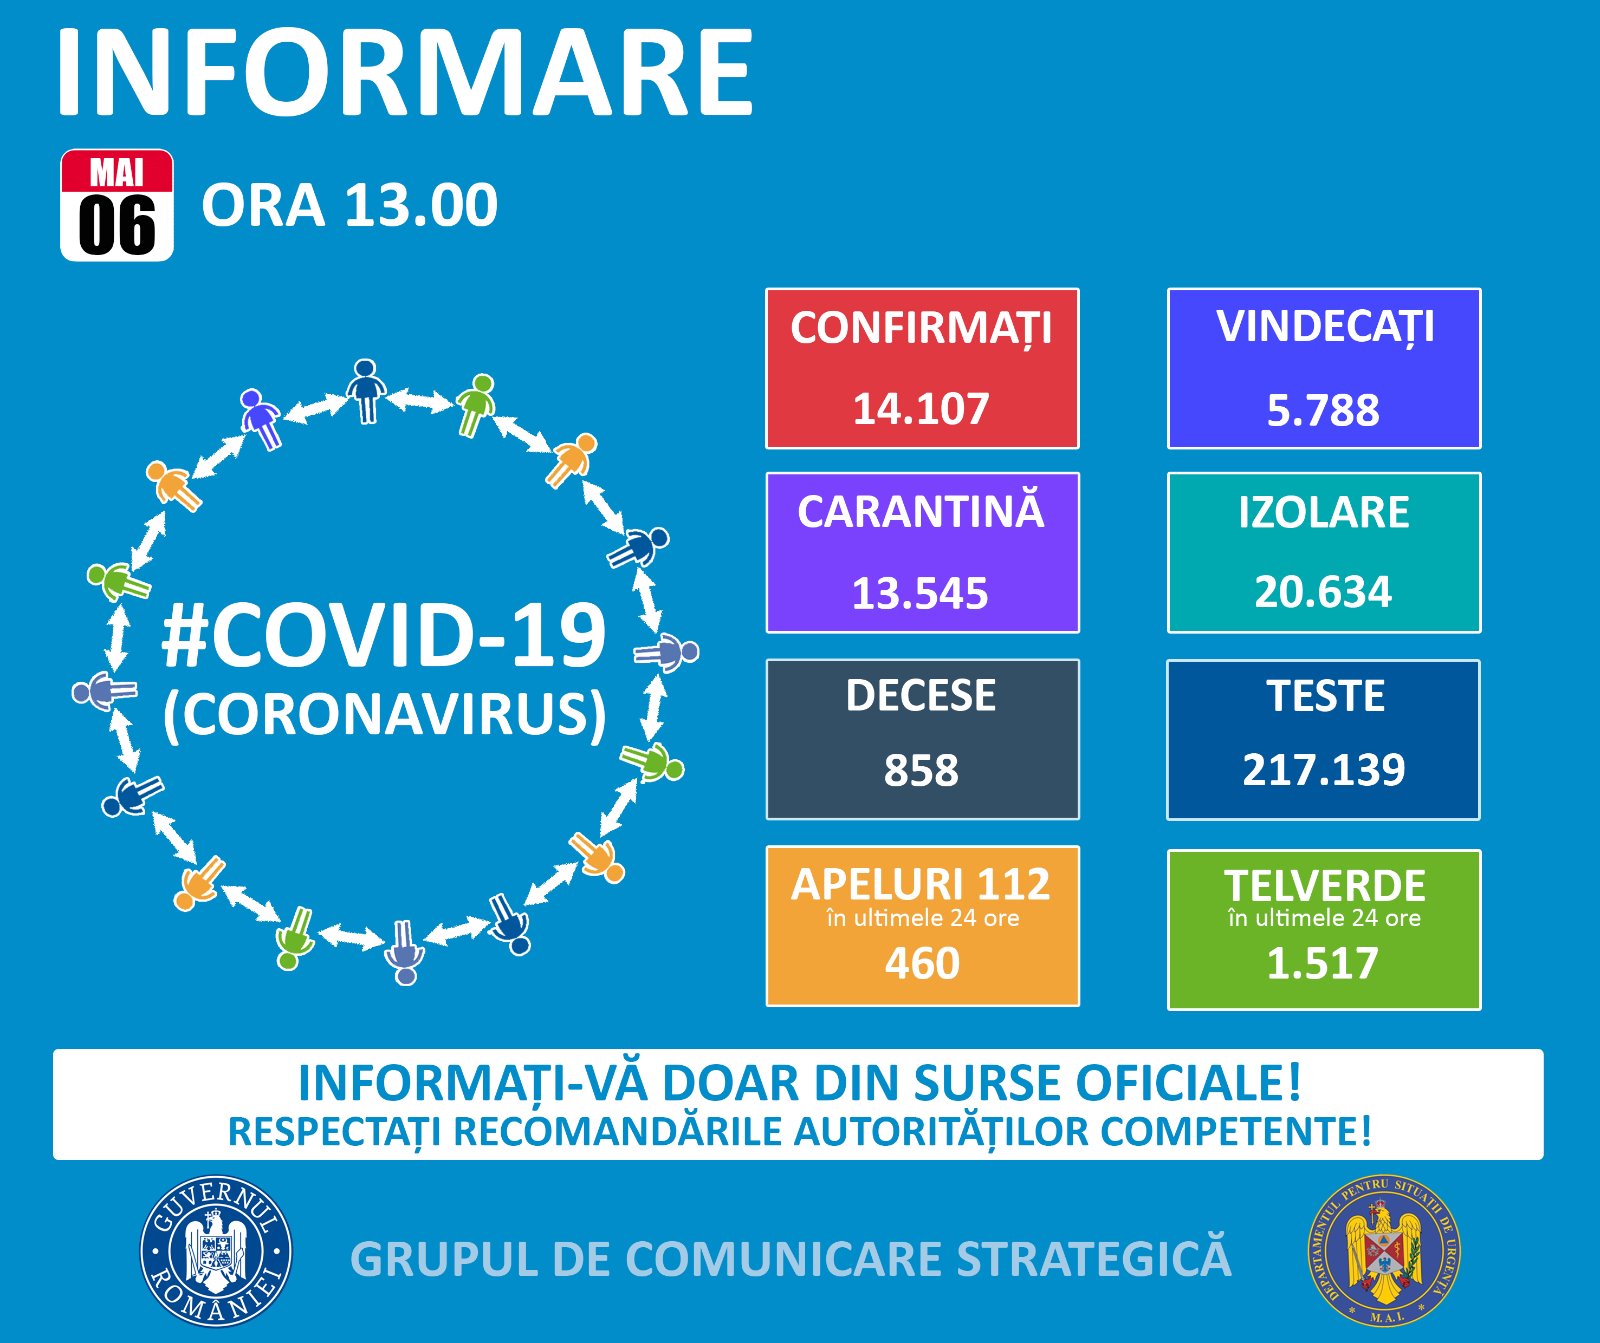 COVID-19 situation in Romania, May 6